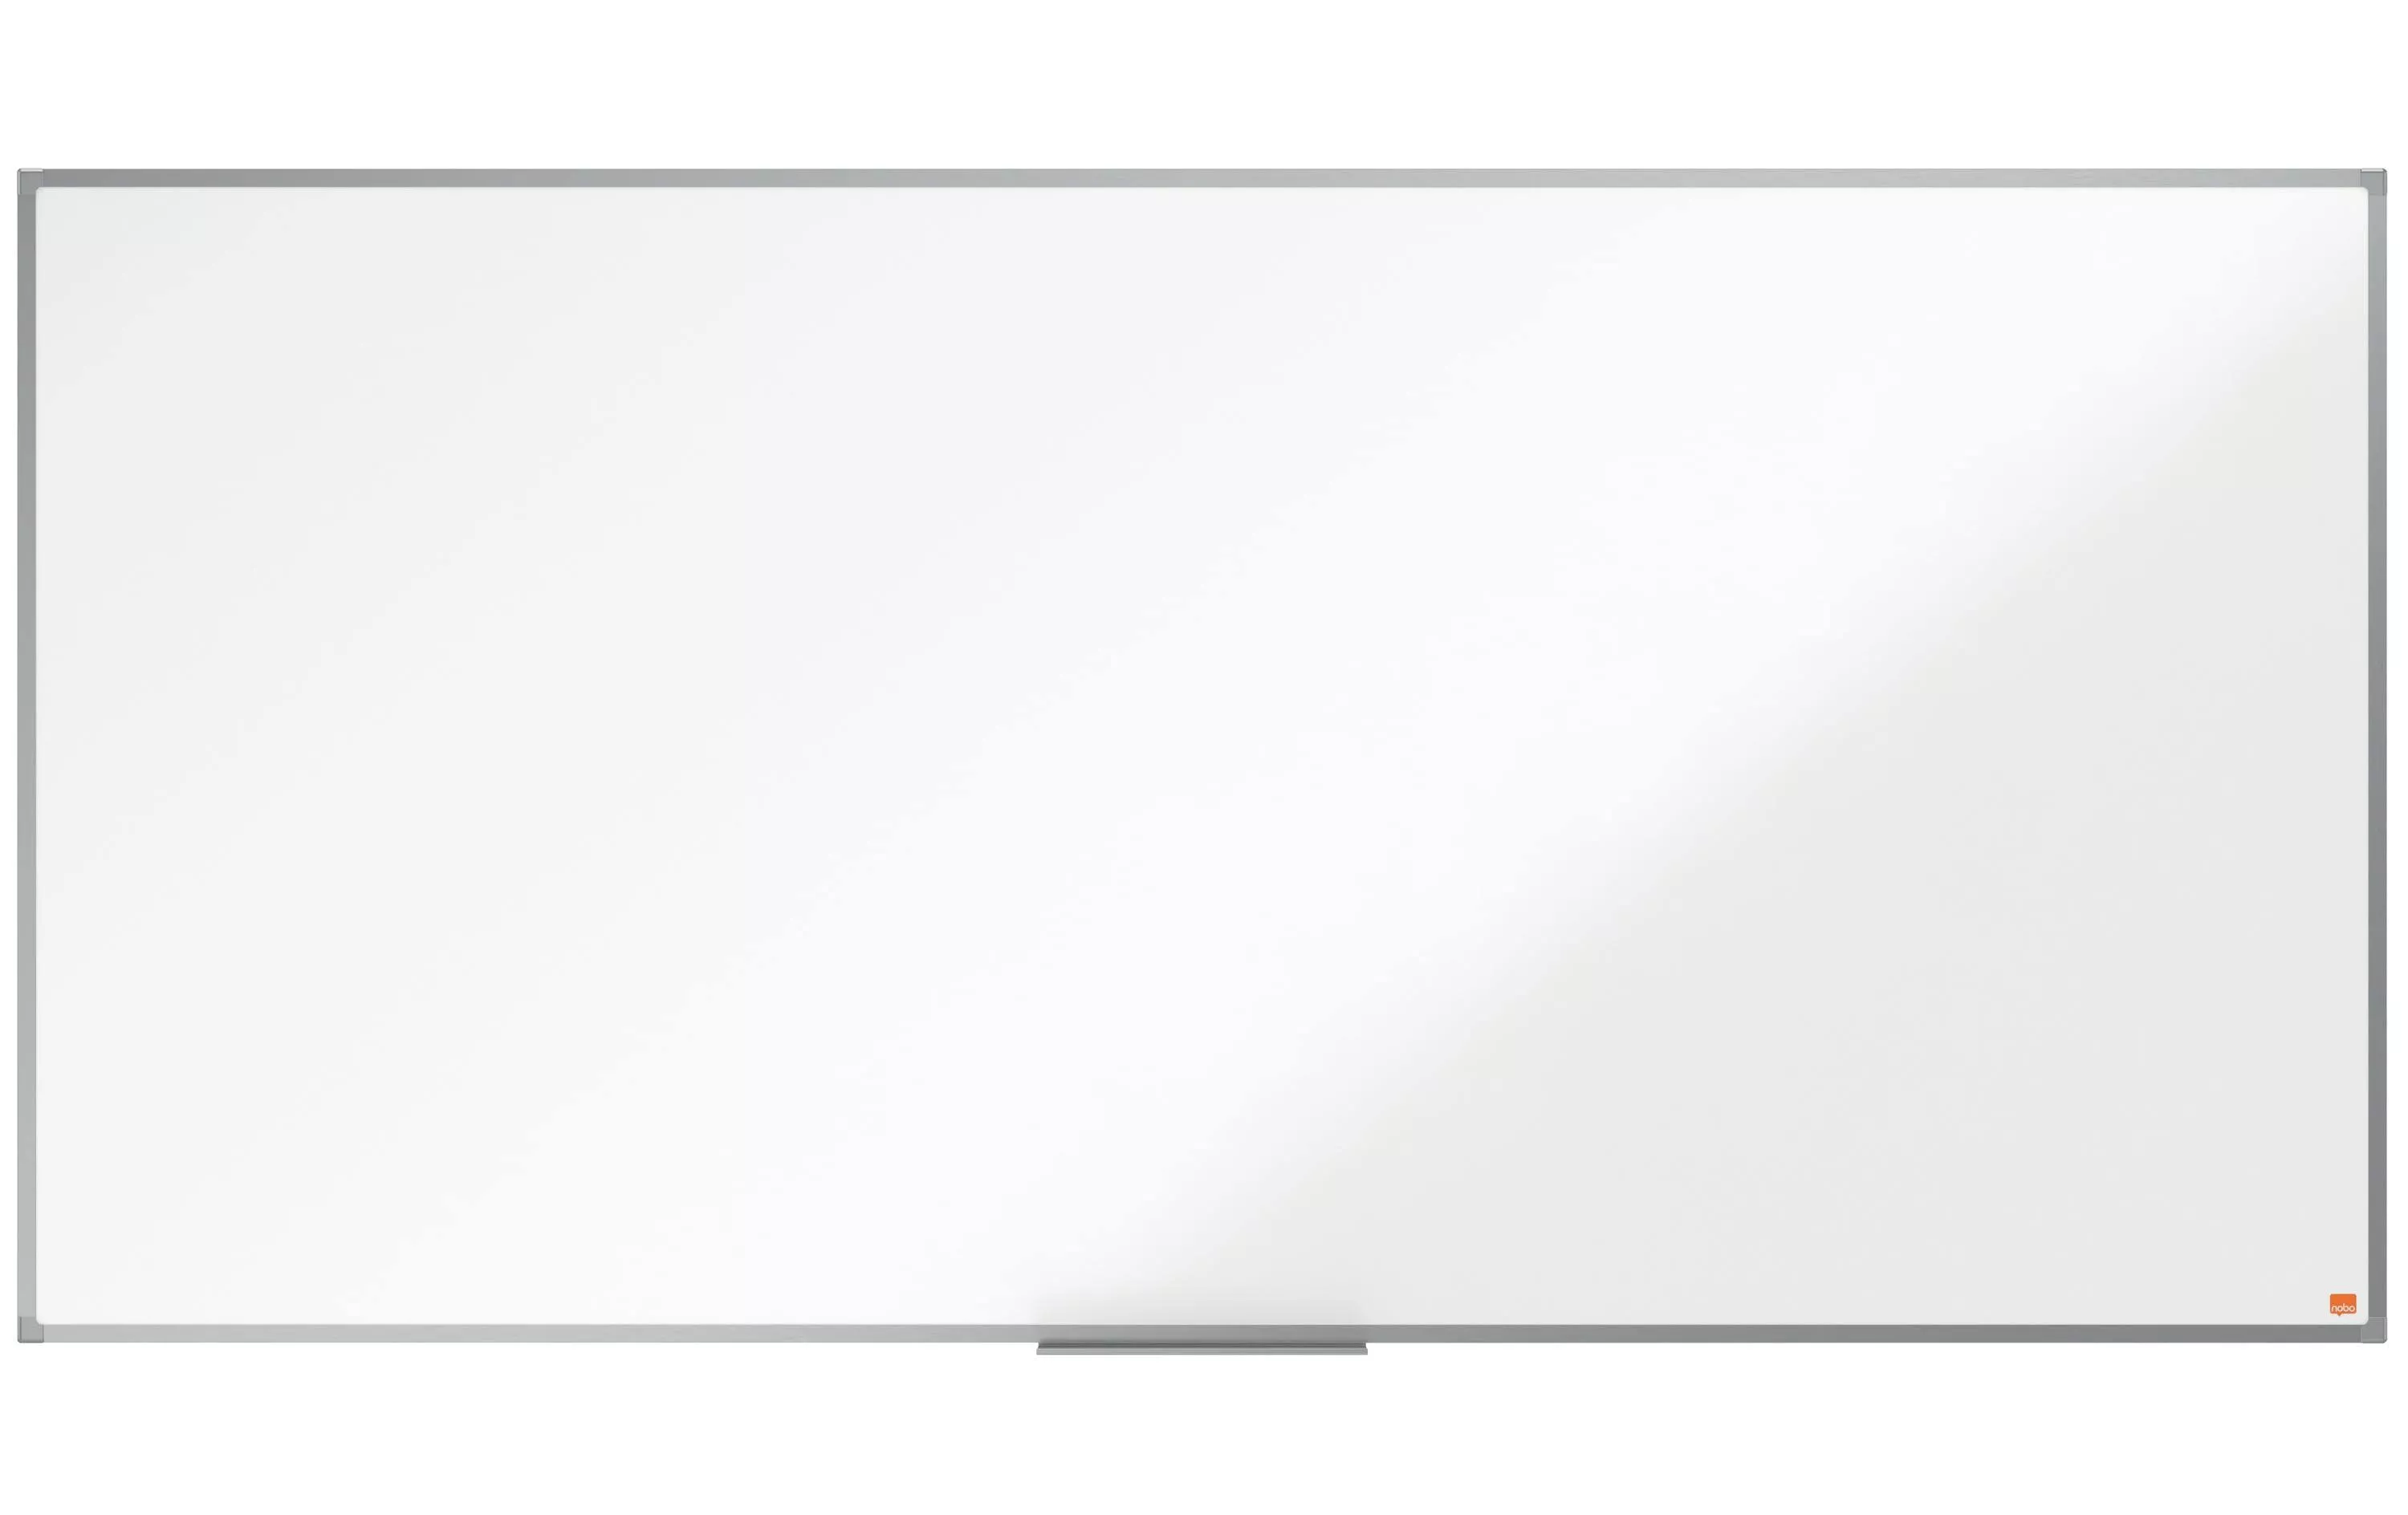 Magnethaftendes Whiteboard Essence 90 cm x 180 cm, Weiss